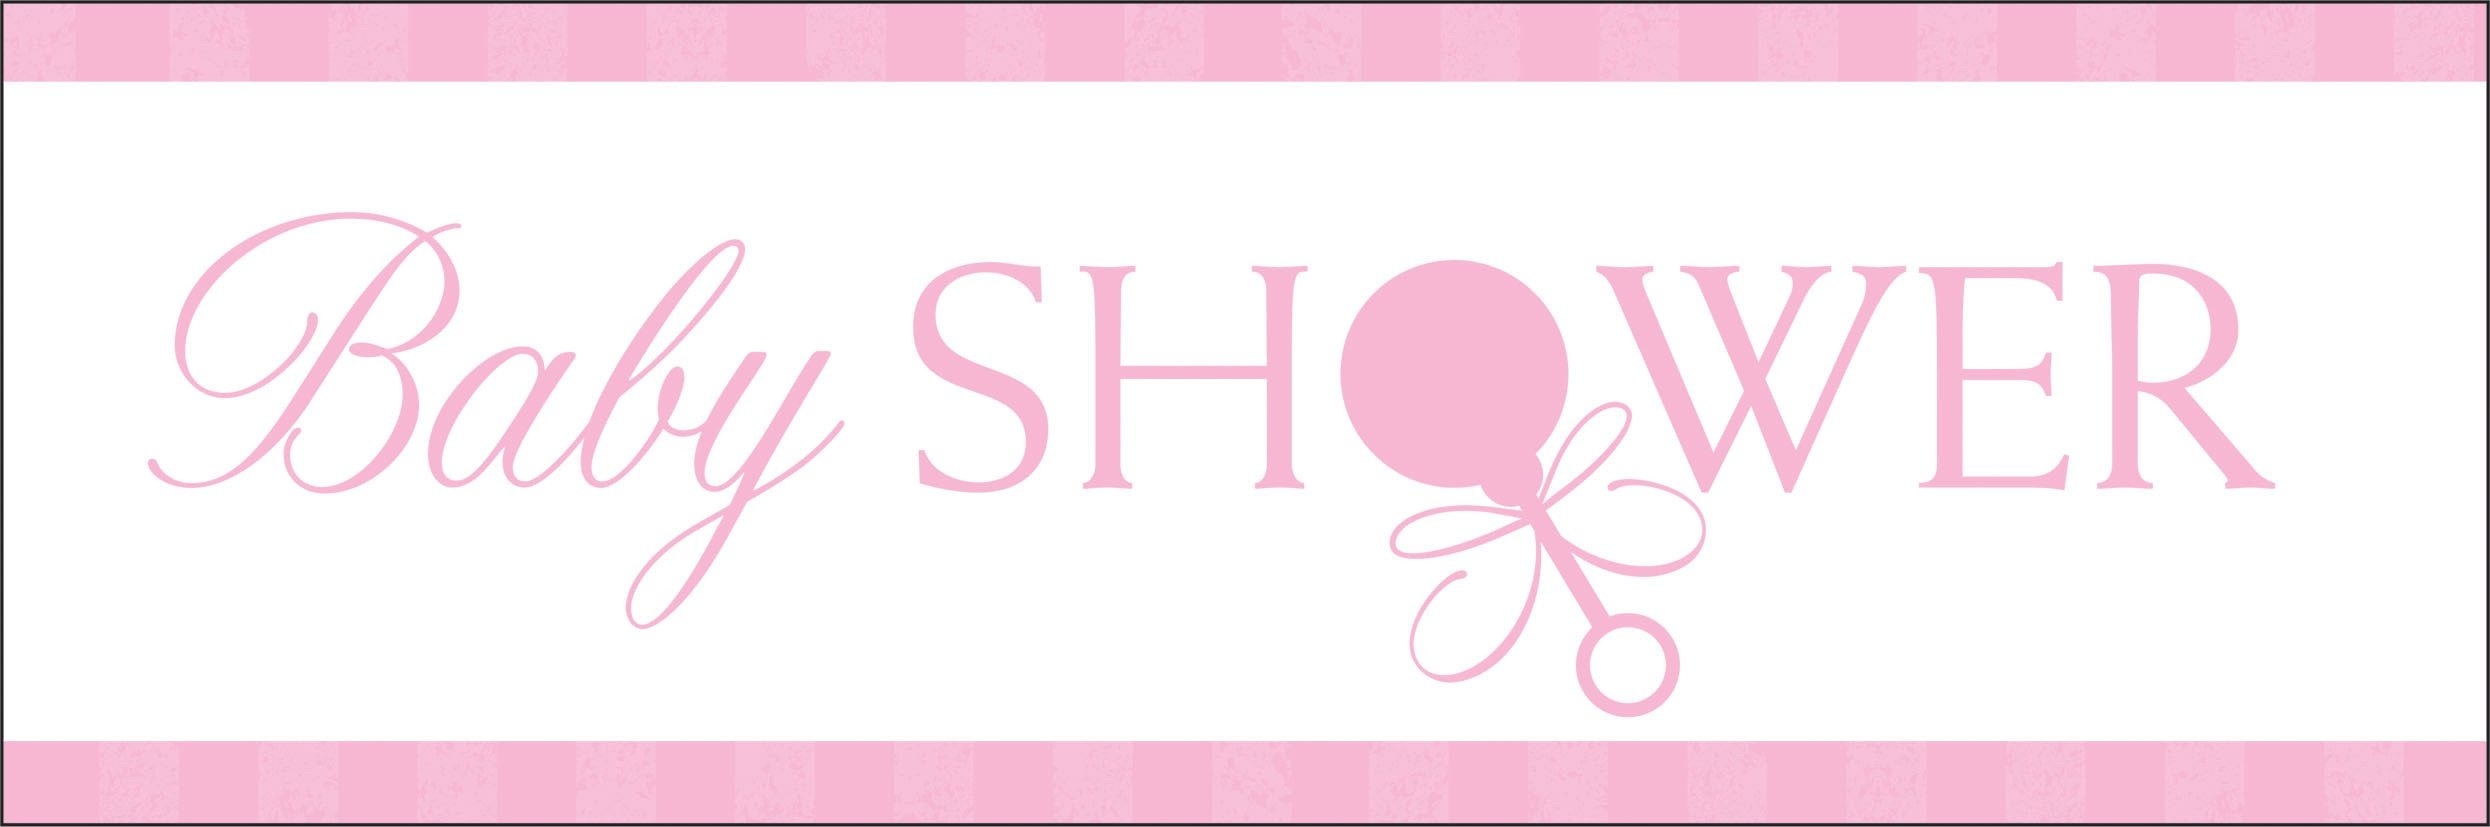 Full Size of Baby Shower:89+ Indulging Baby Shower Banner Picture Inspirations Best Shows For Babies With Baby Shower Baskets Plus Twins Baby Shower Together With Free Baby Shower Games As Well As Baby Shower Hairstyles And Baby Shower Dessert Table